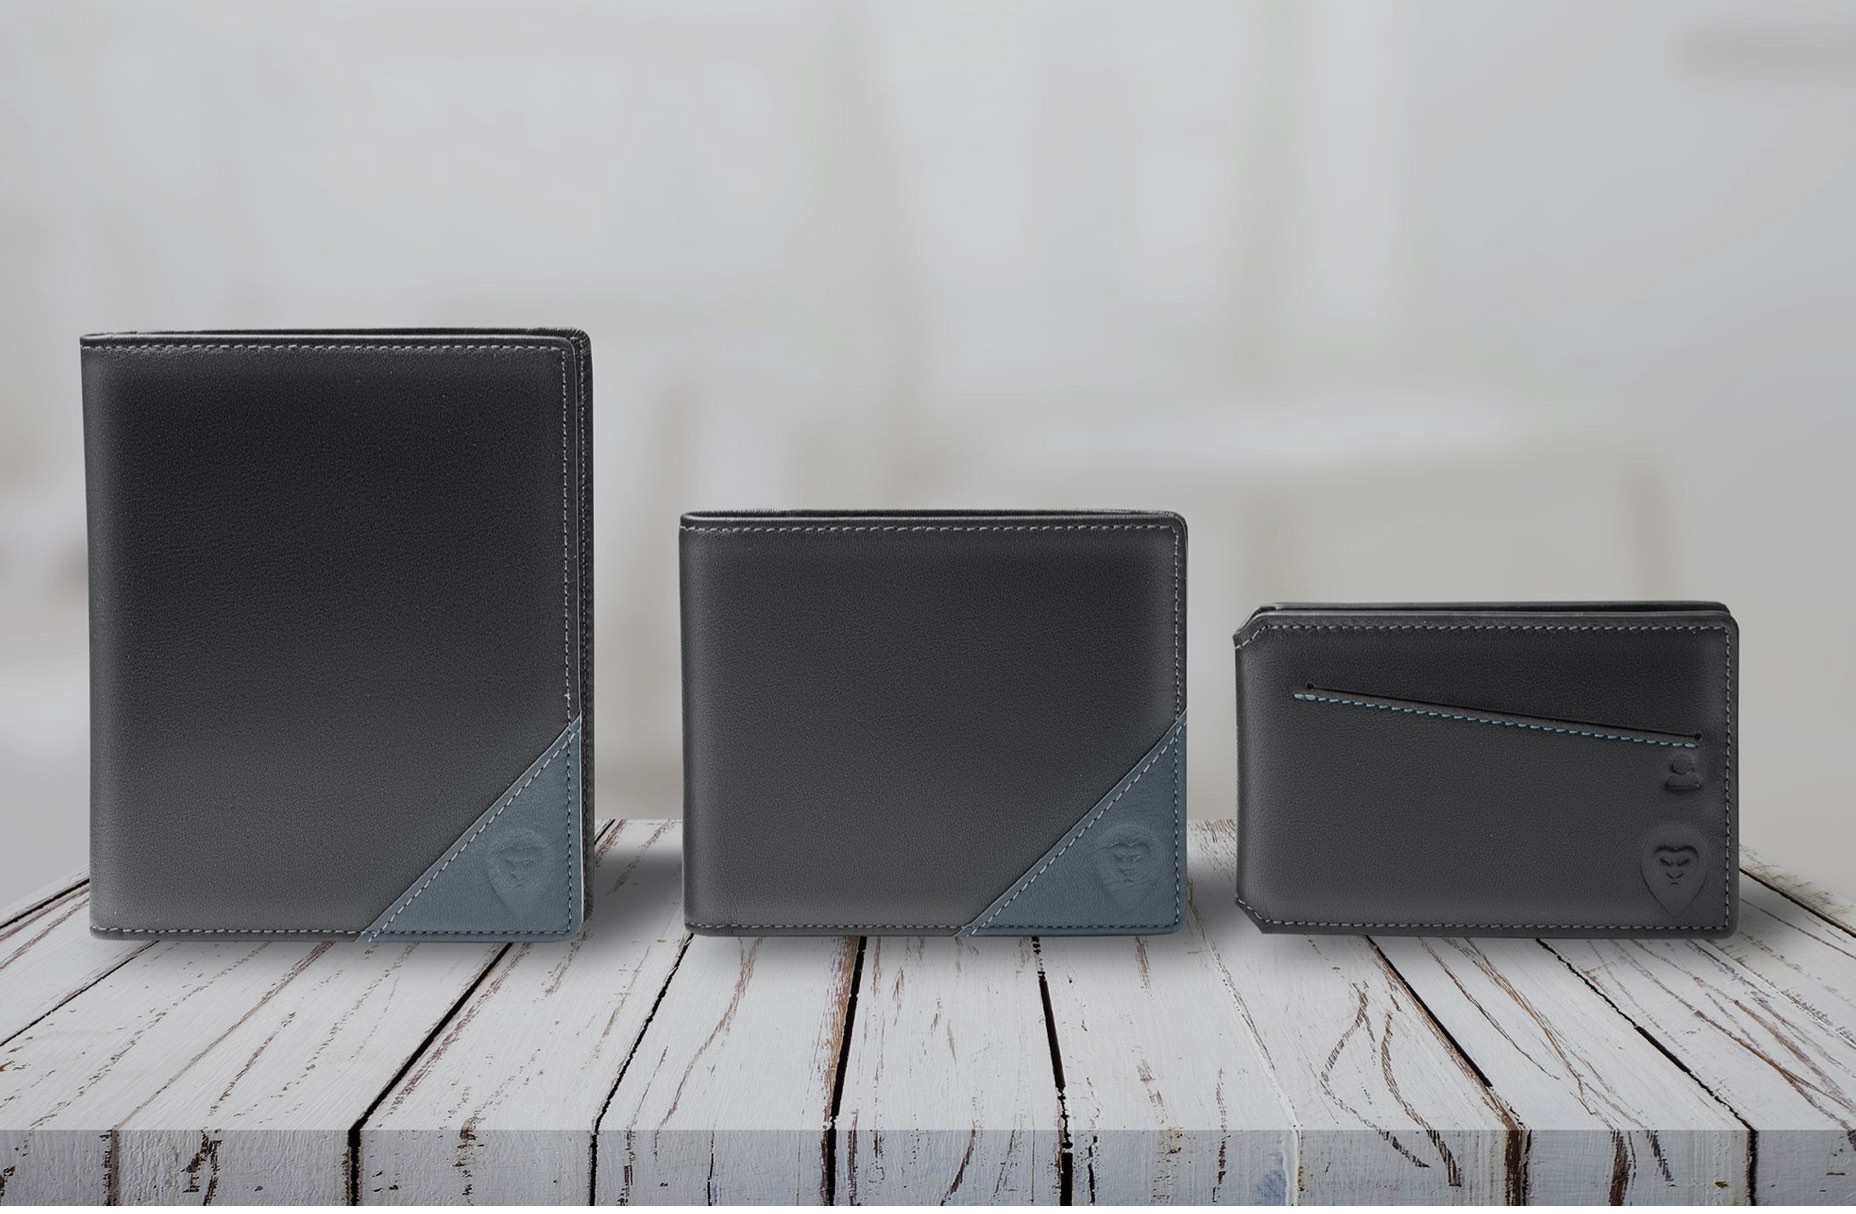 3 different styles of Wallor 2.0 wallets. Smart wallets with GPS tracking.